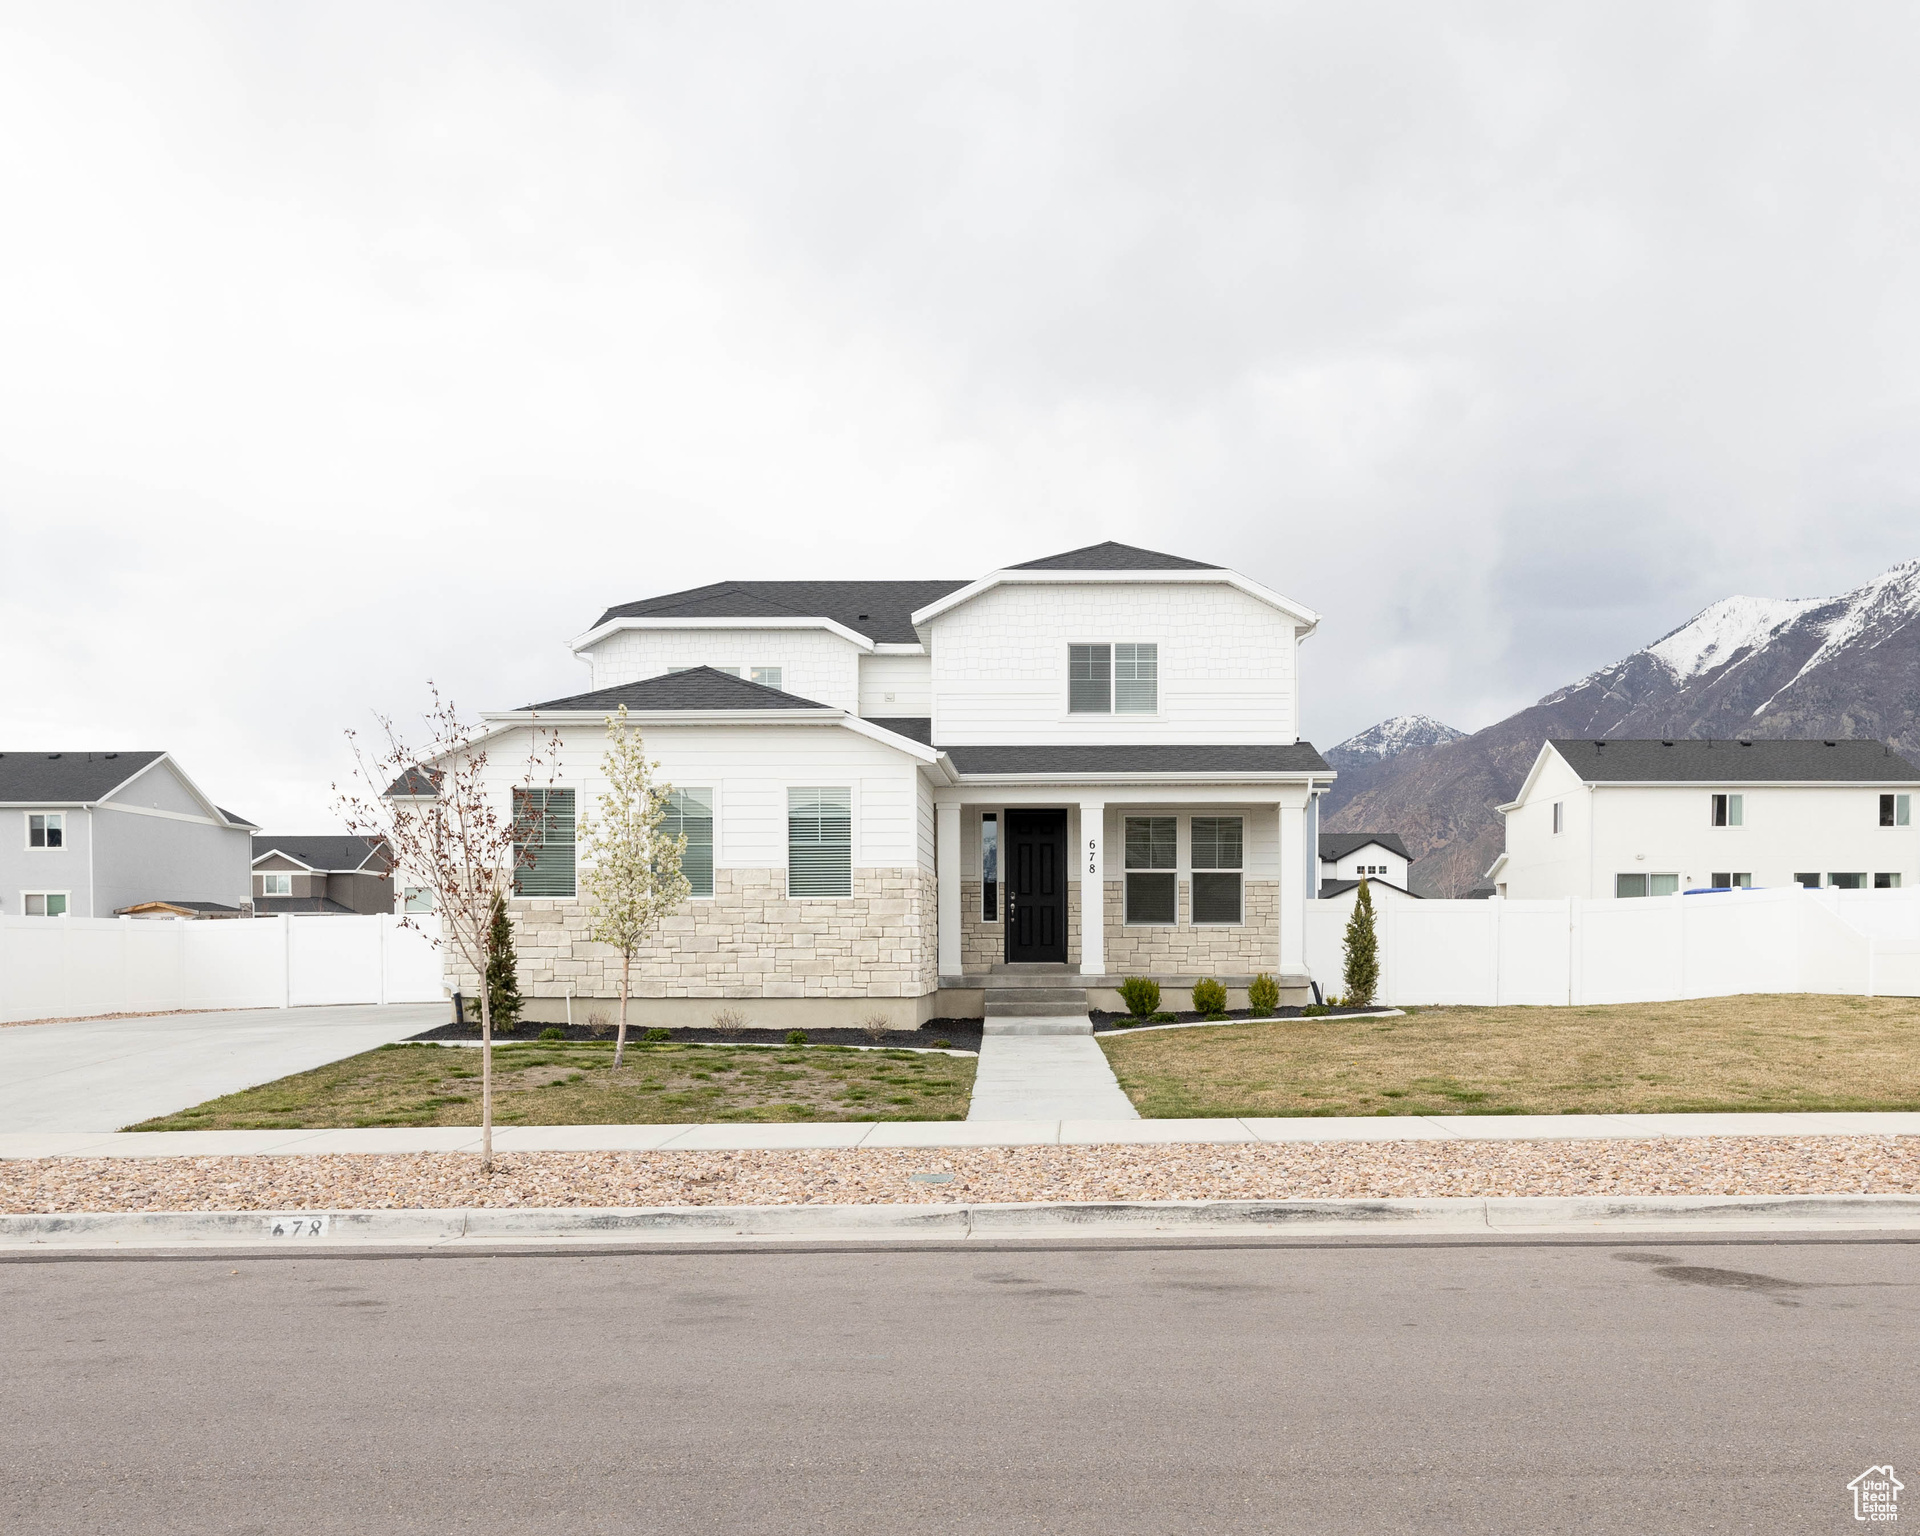 Front facade with a mountain view and a front yard